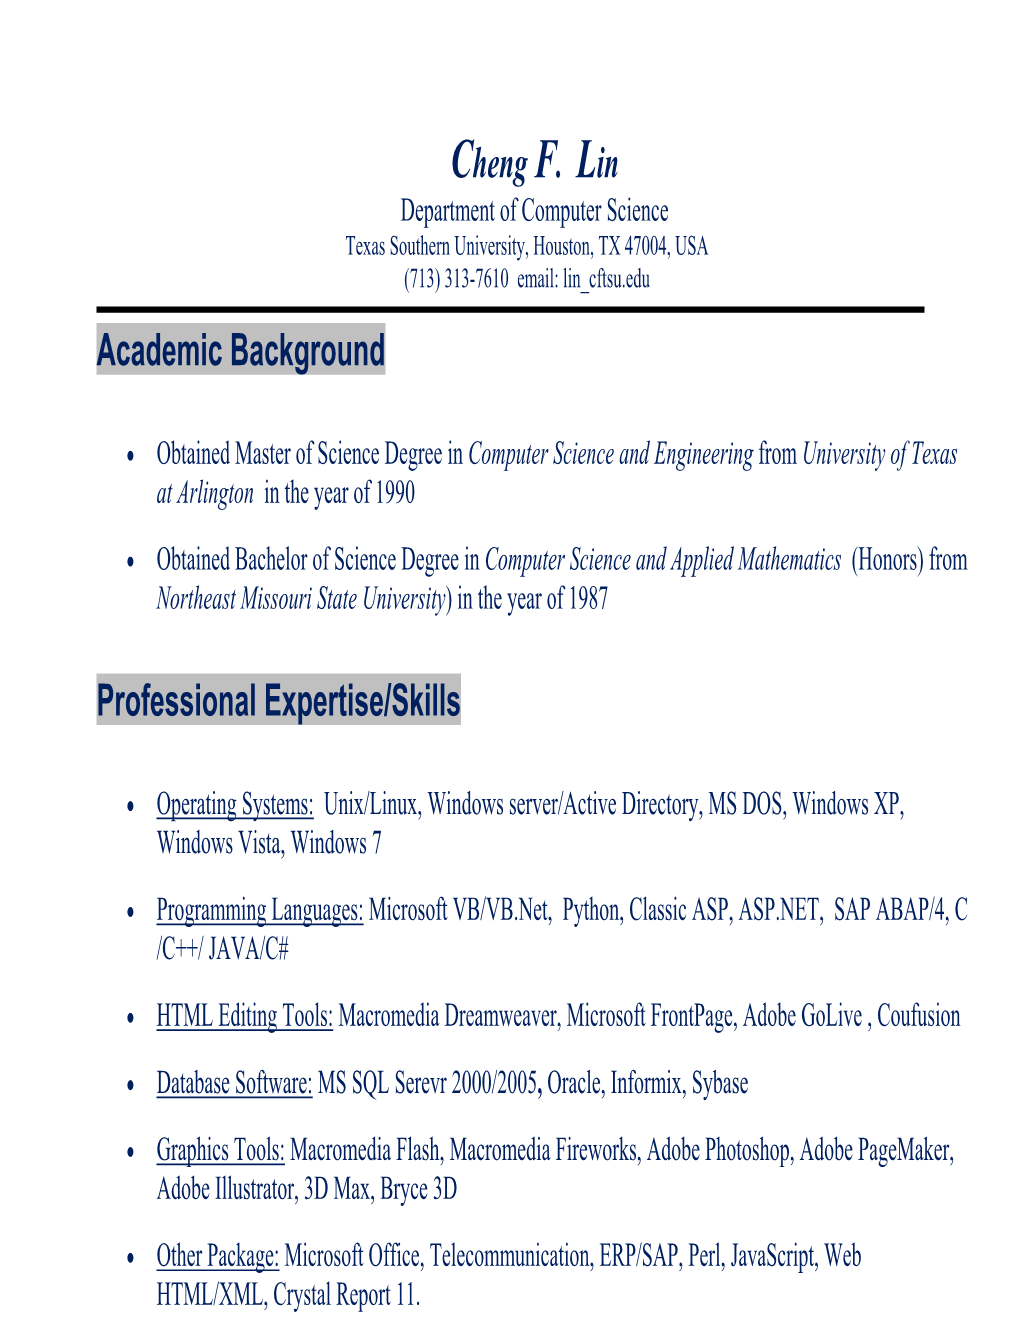 Cheng F. Lin Academic Background Professional Expertise/Skills